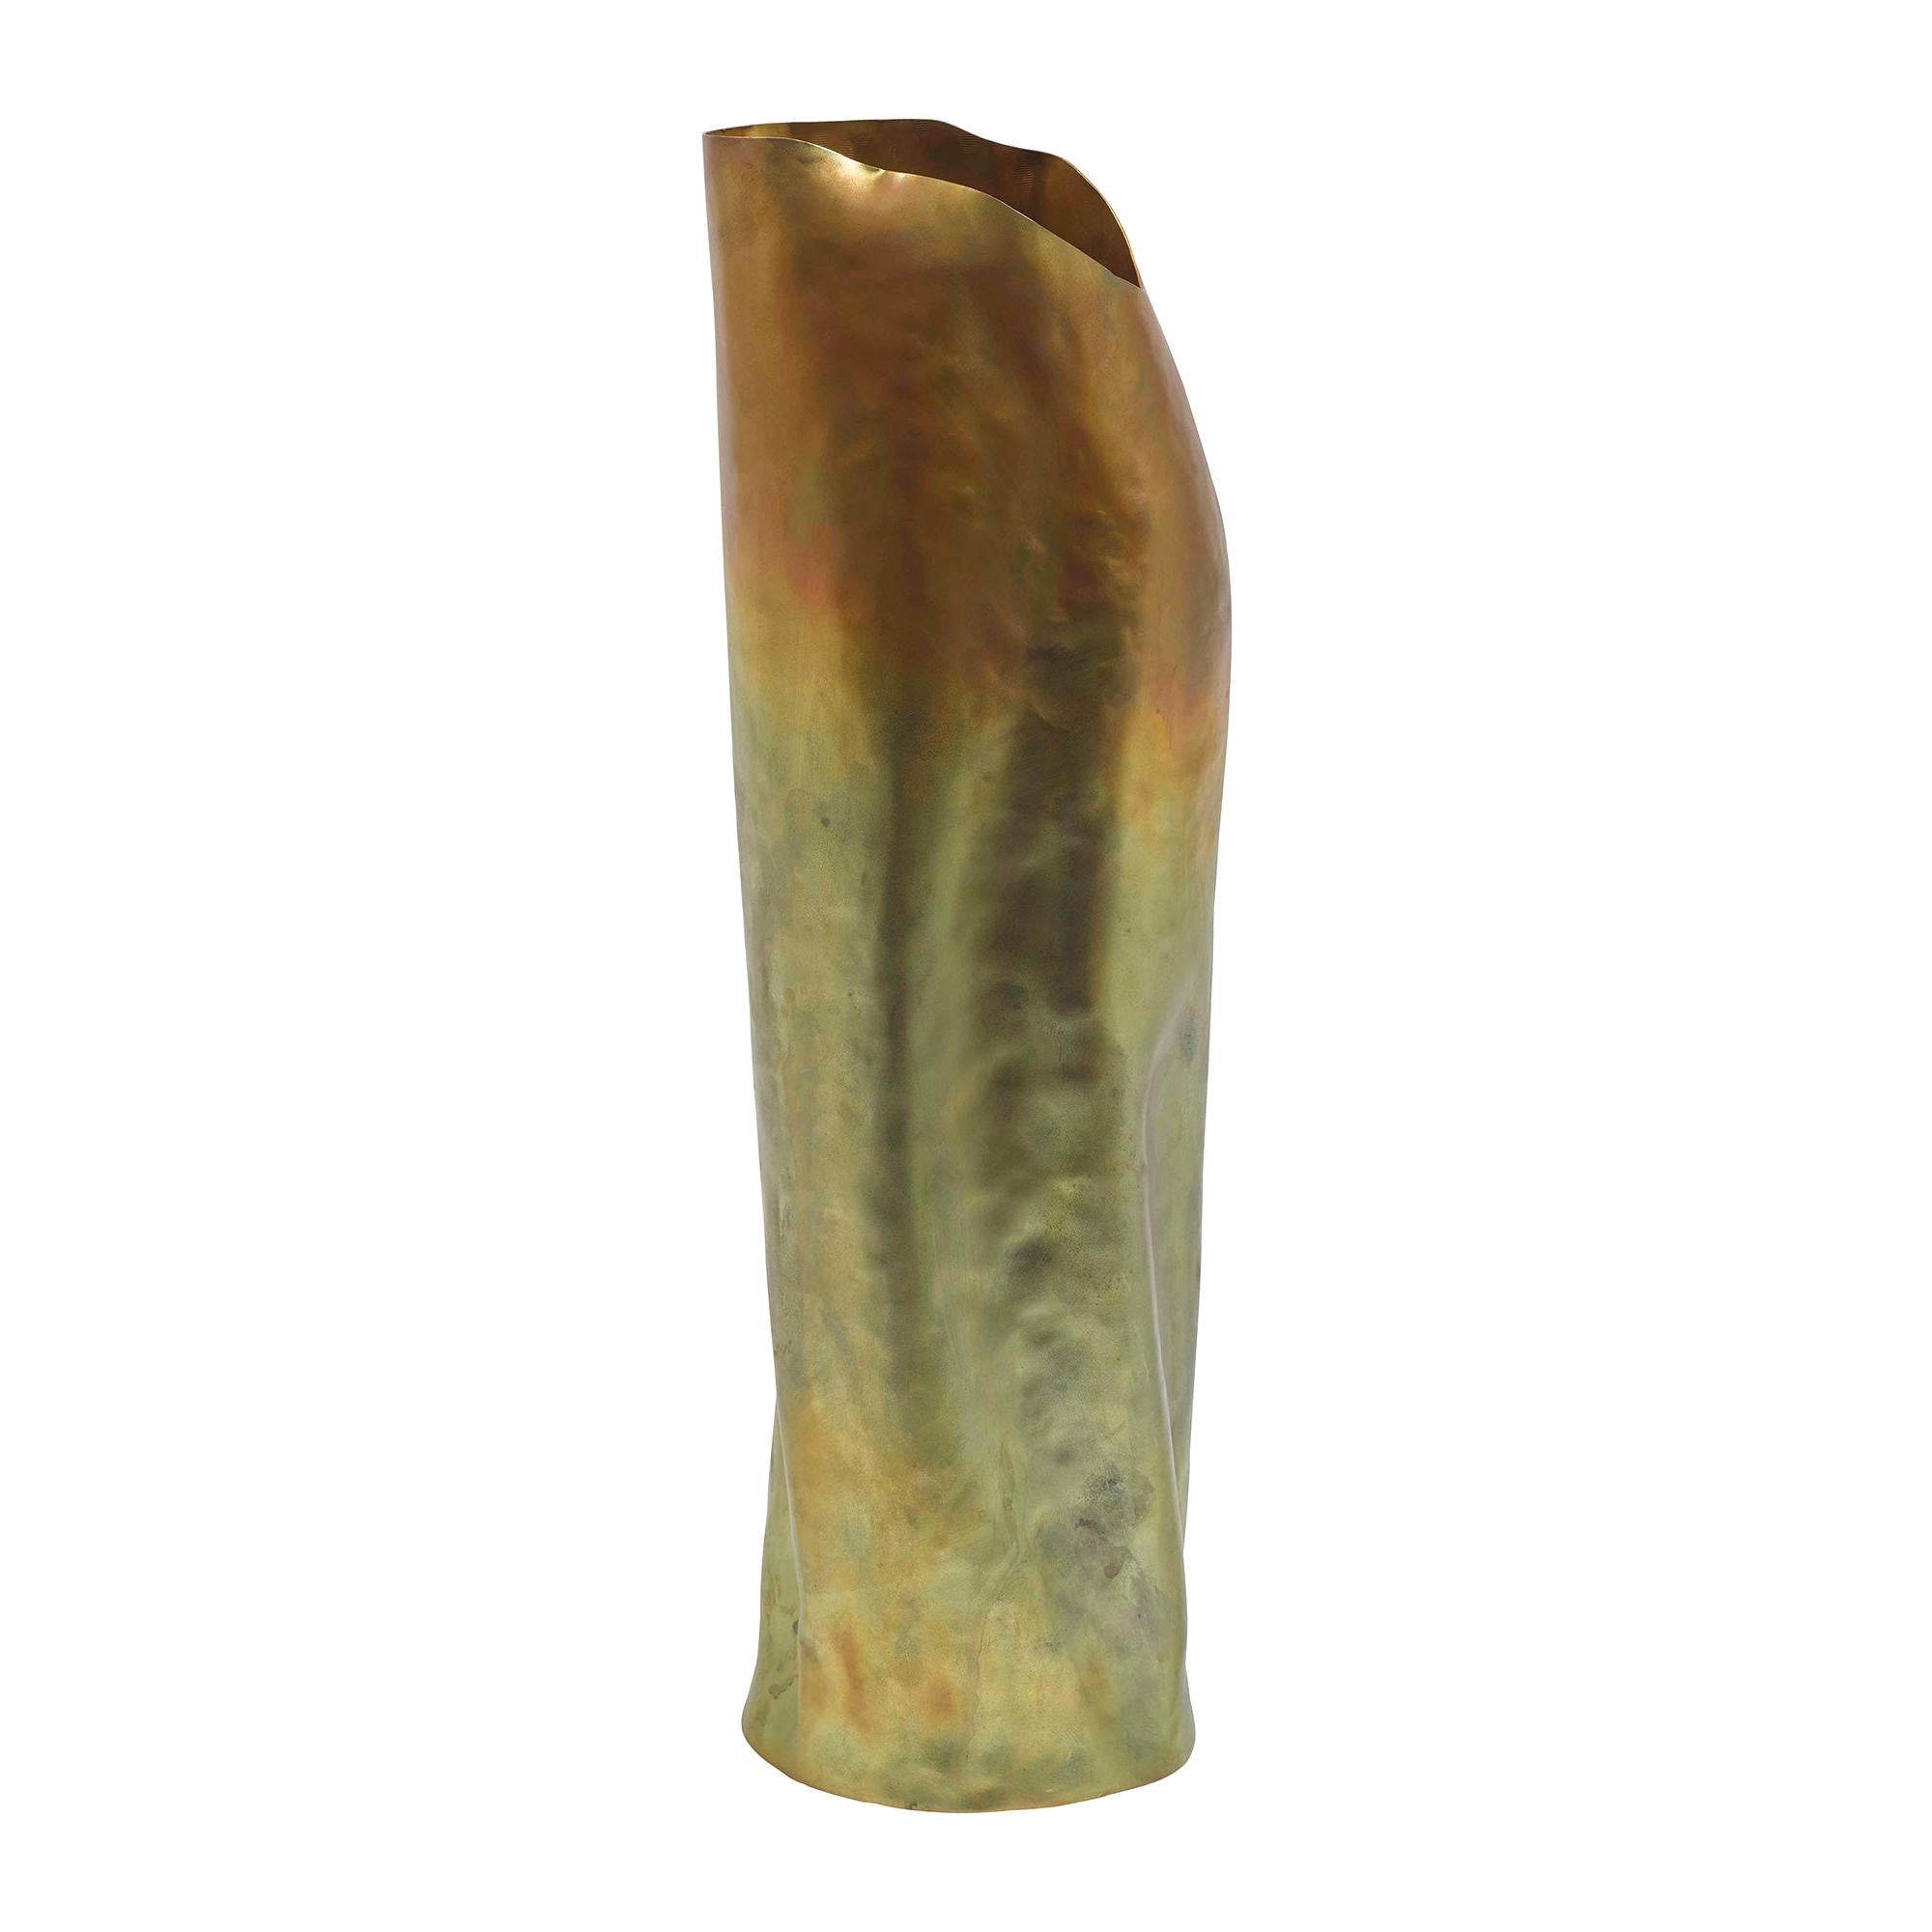 Lona Brass Vase with Distressed Patina by CuratedKravet